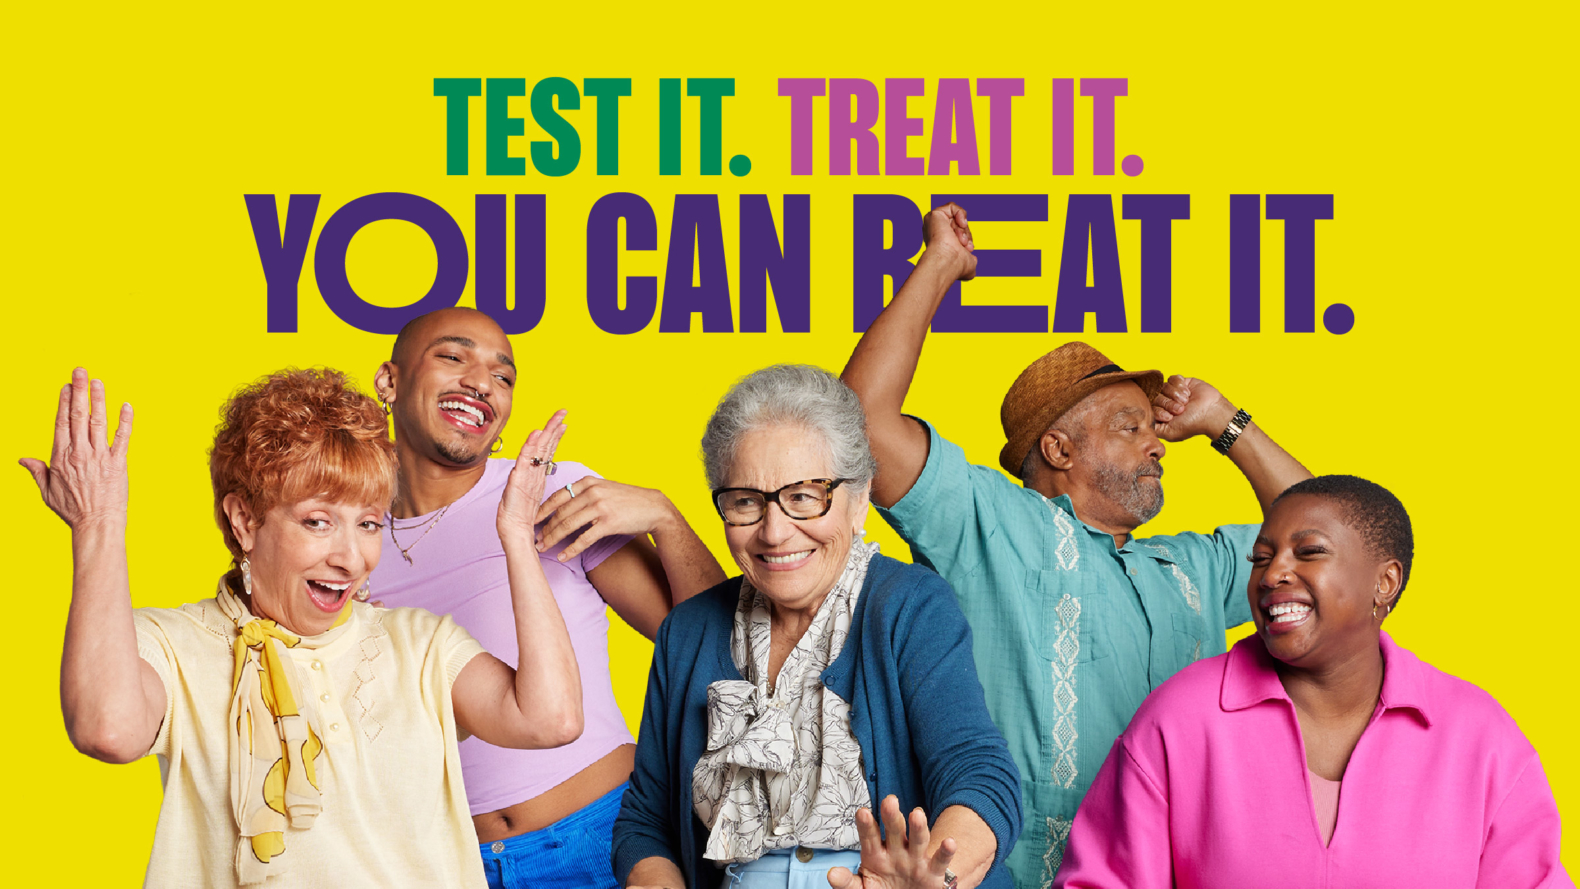 Image showing a diverse group of five (5) people smiling and happy, some with hands raised in the air, wearing shirts that are (in order): yellow, lavender, dark blue, teal and bright pink, bright yellow background with all caps copy, “Test it. Treat it. You can beat it.” in green, pink and then purple font